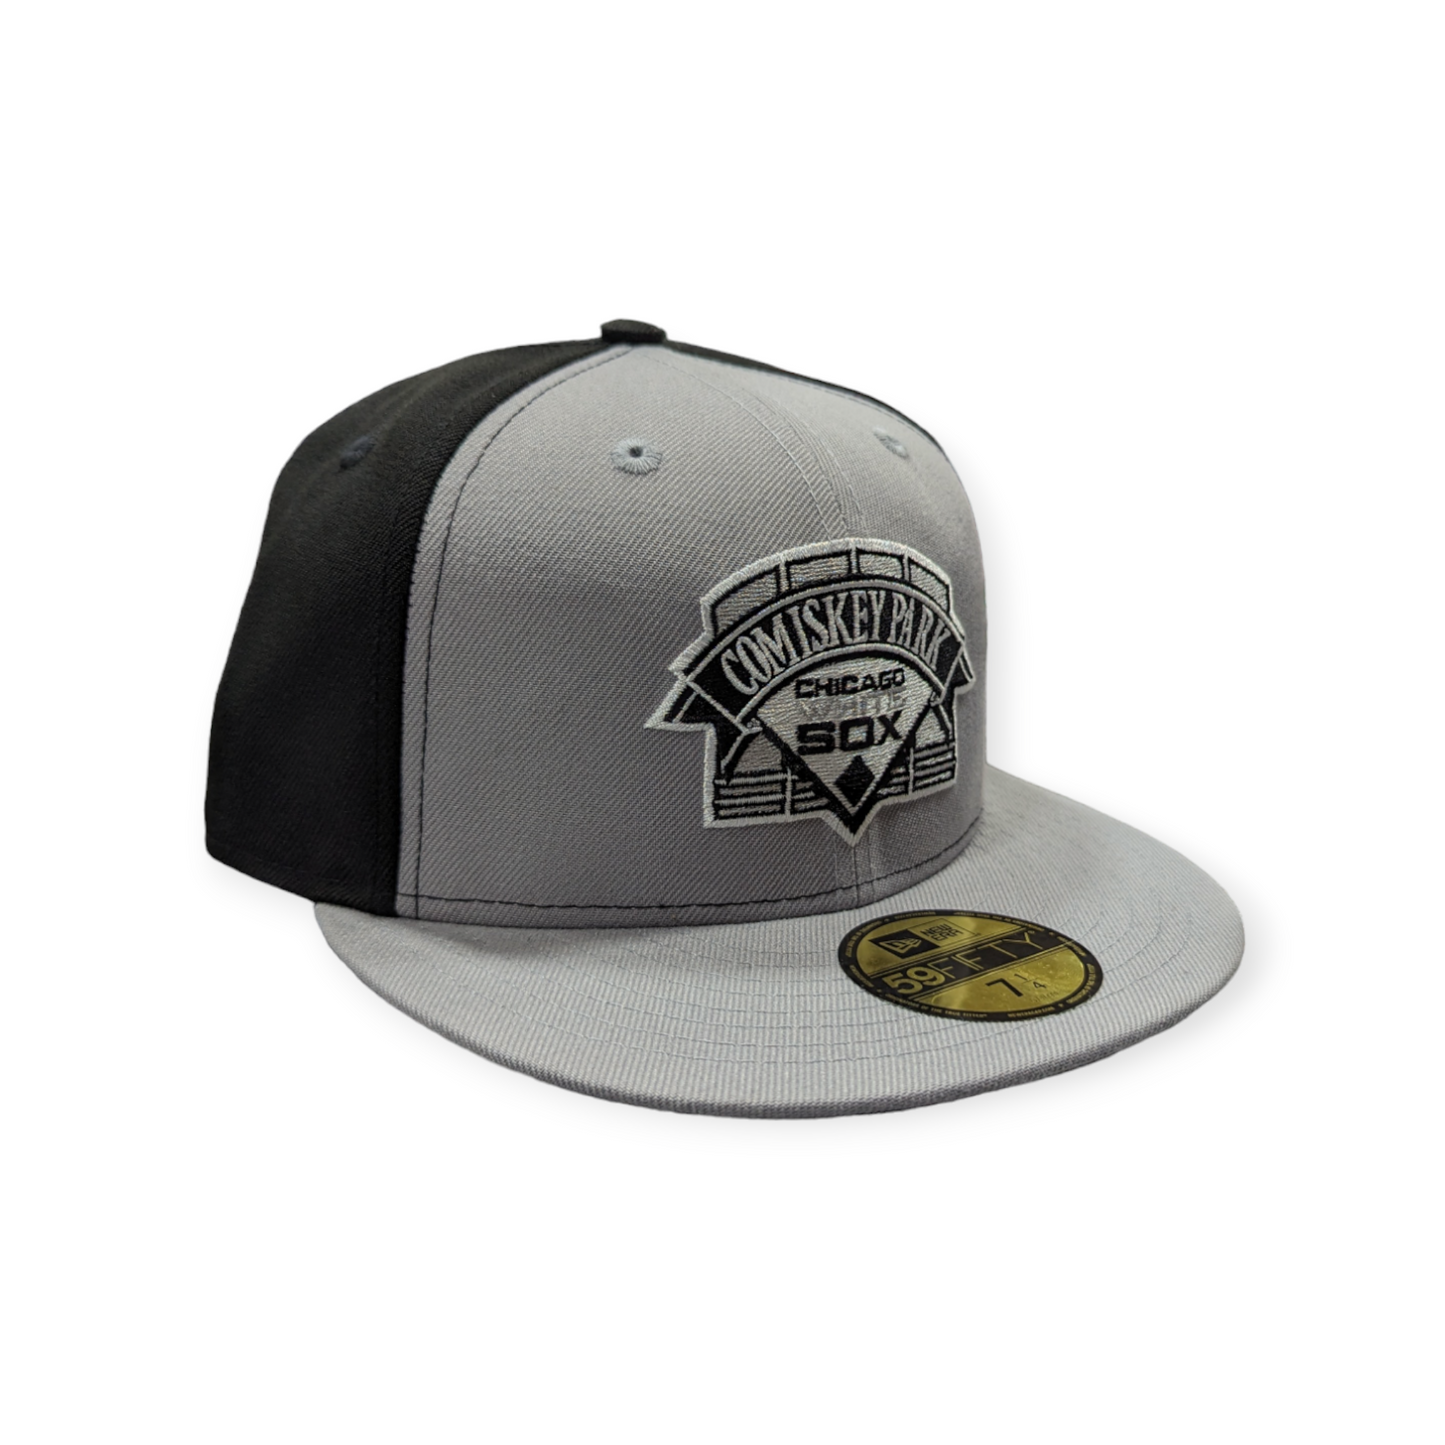 Chicago White Sox New Era Comiskey Park Gray/Black 59FIFTY Fitted Hat